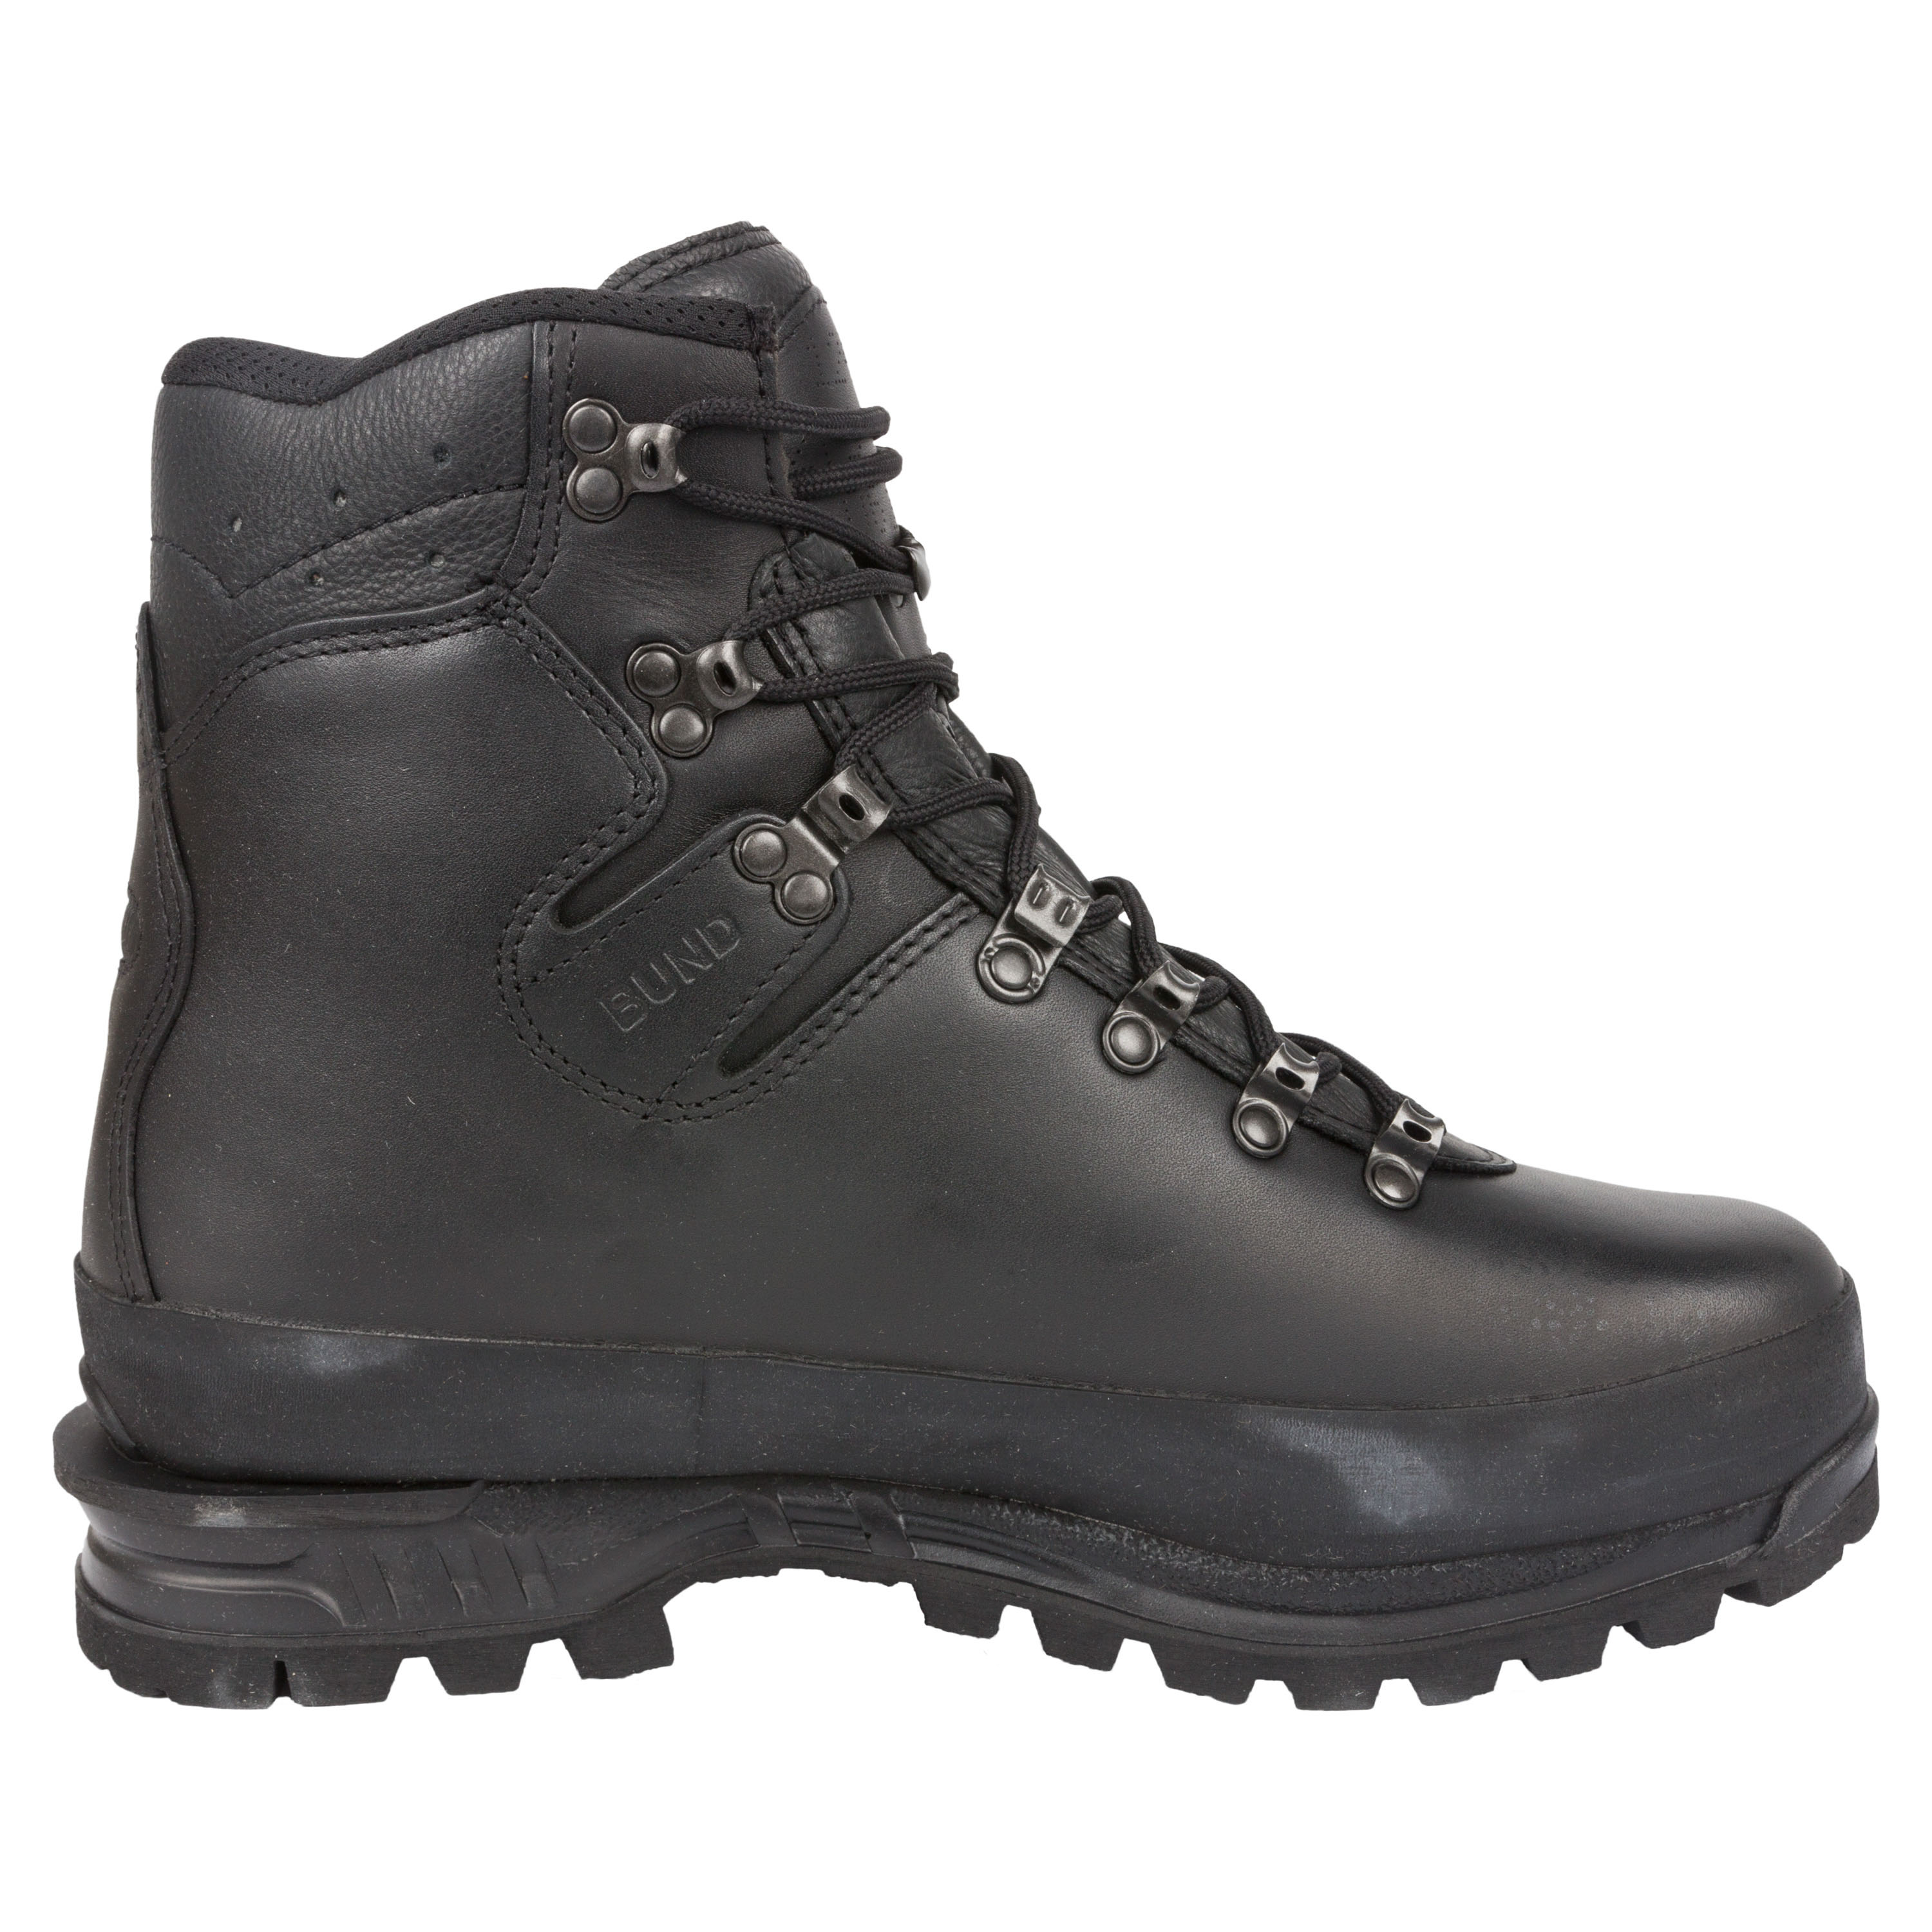 Purchase the Meindl German Mountain Boot black by ASMC